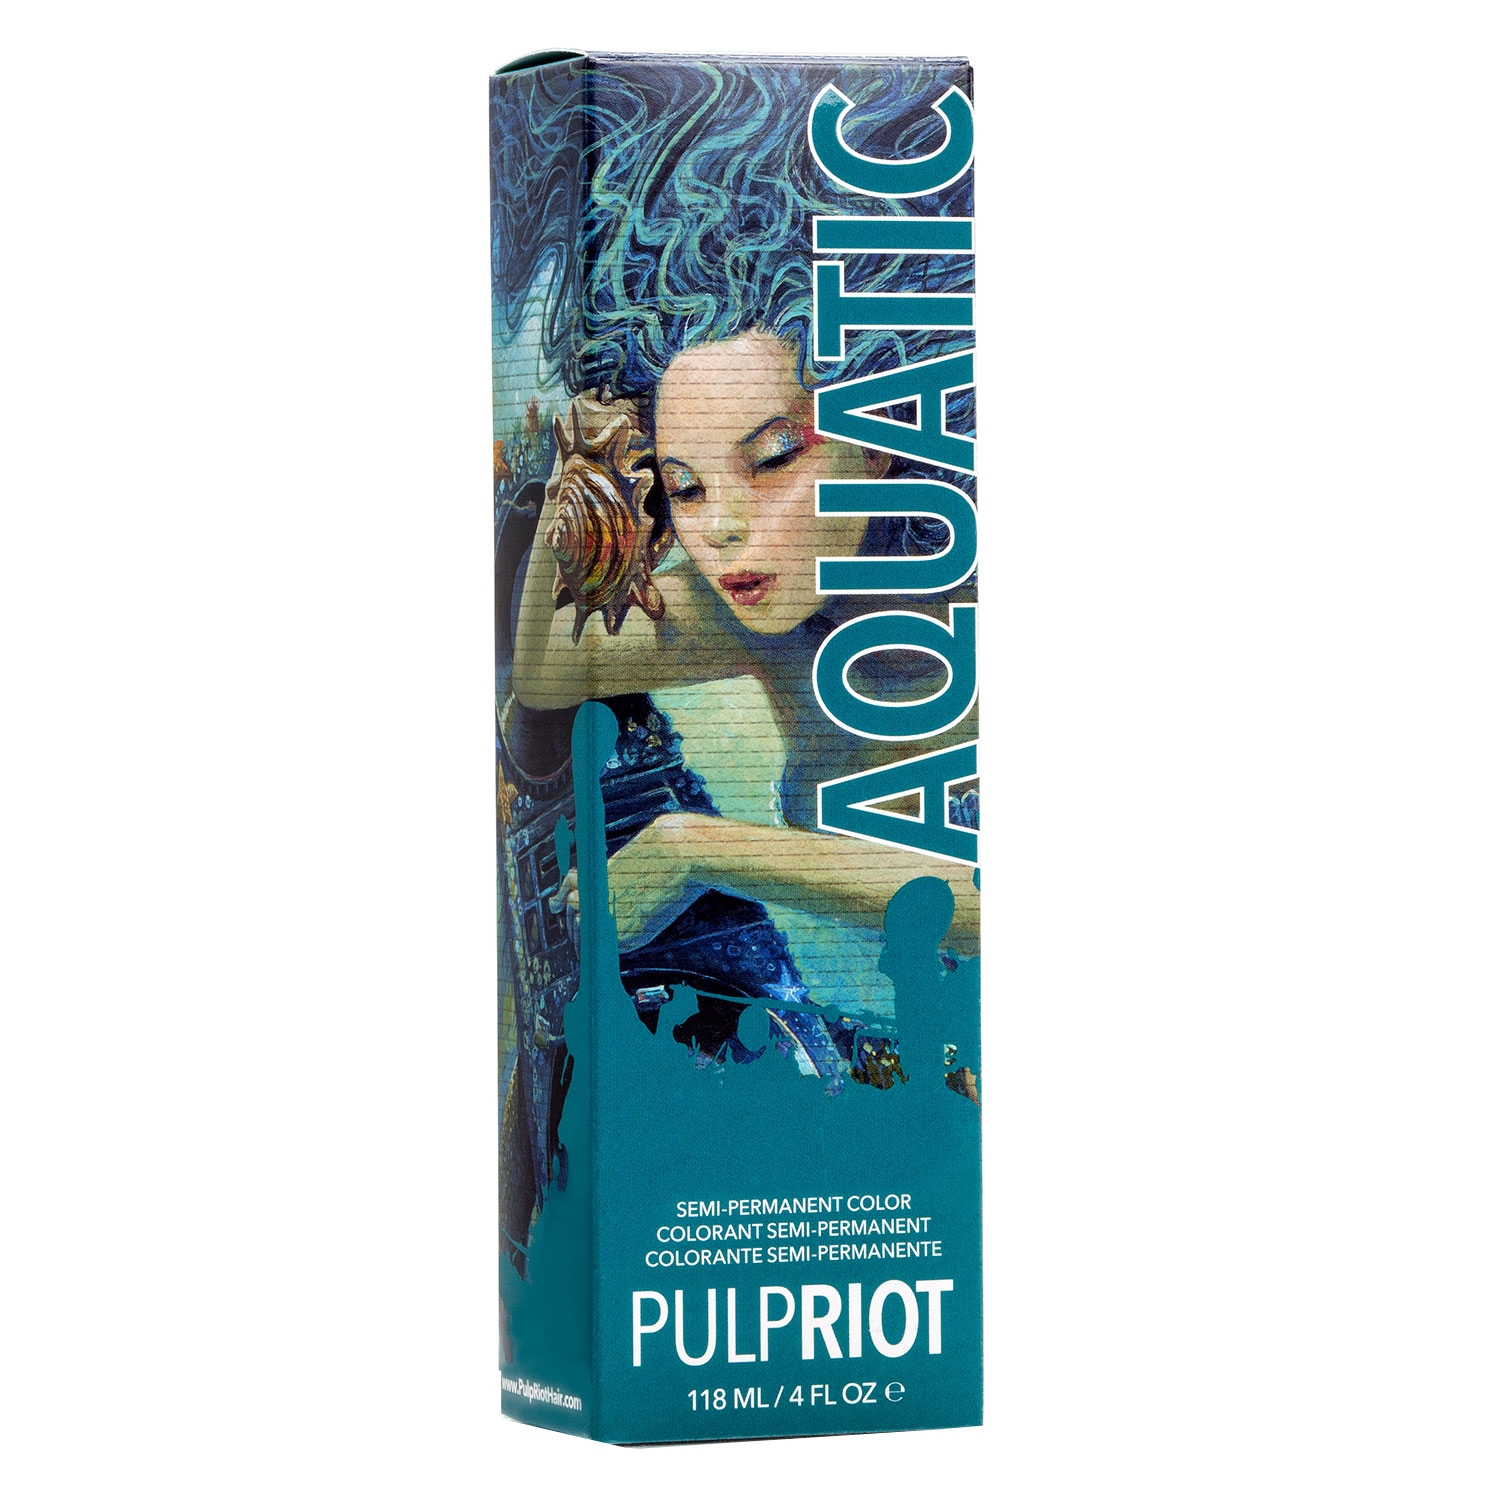 Product image from Pulp Riot - Aquatic